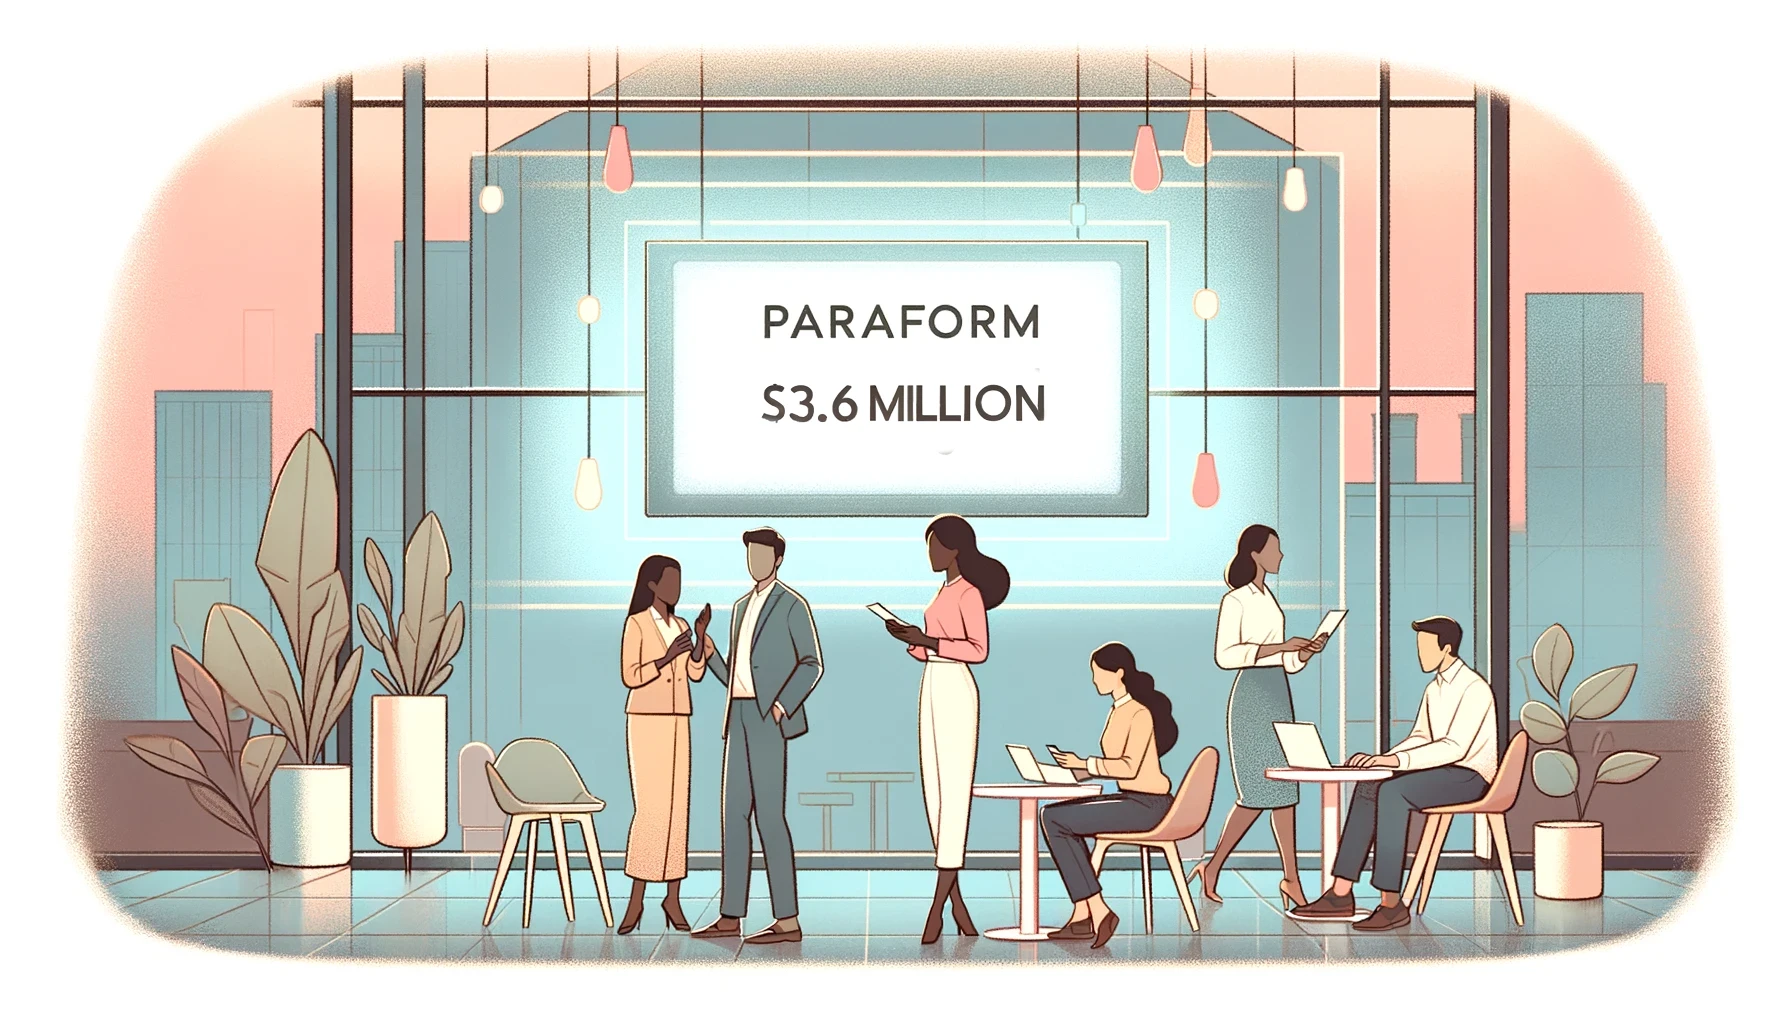 Paraform Secures $3.6 Million in Seed Funding to Link Startups with Recruiter Networks